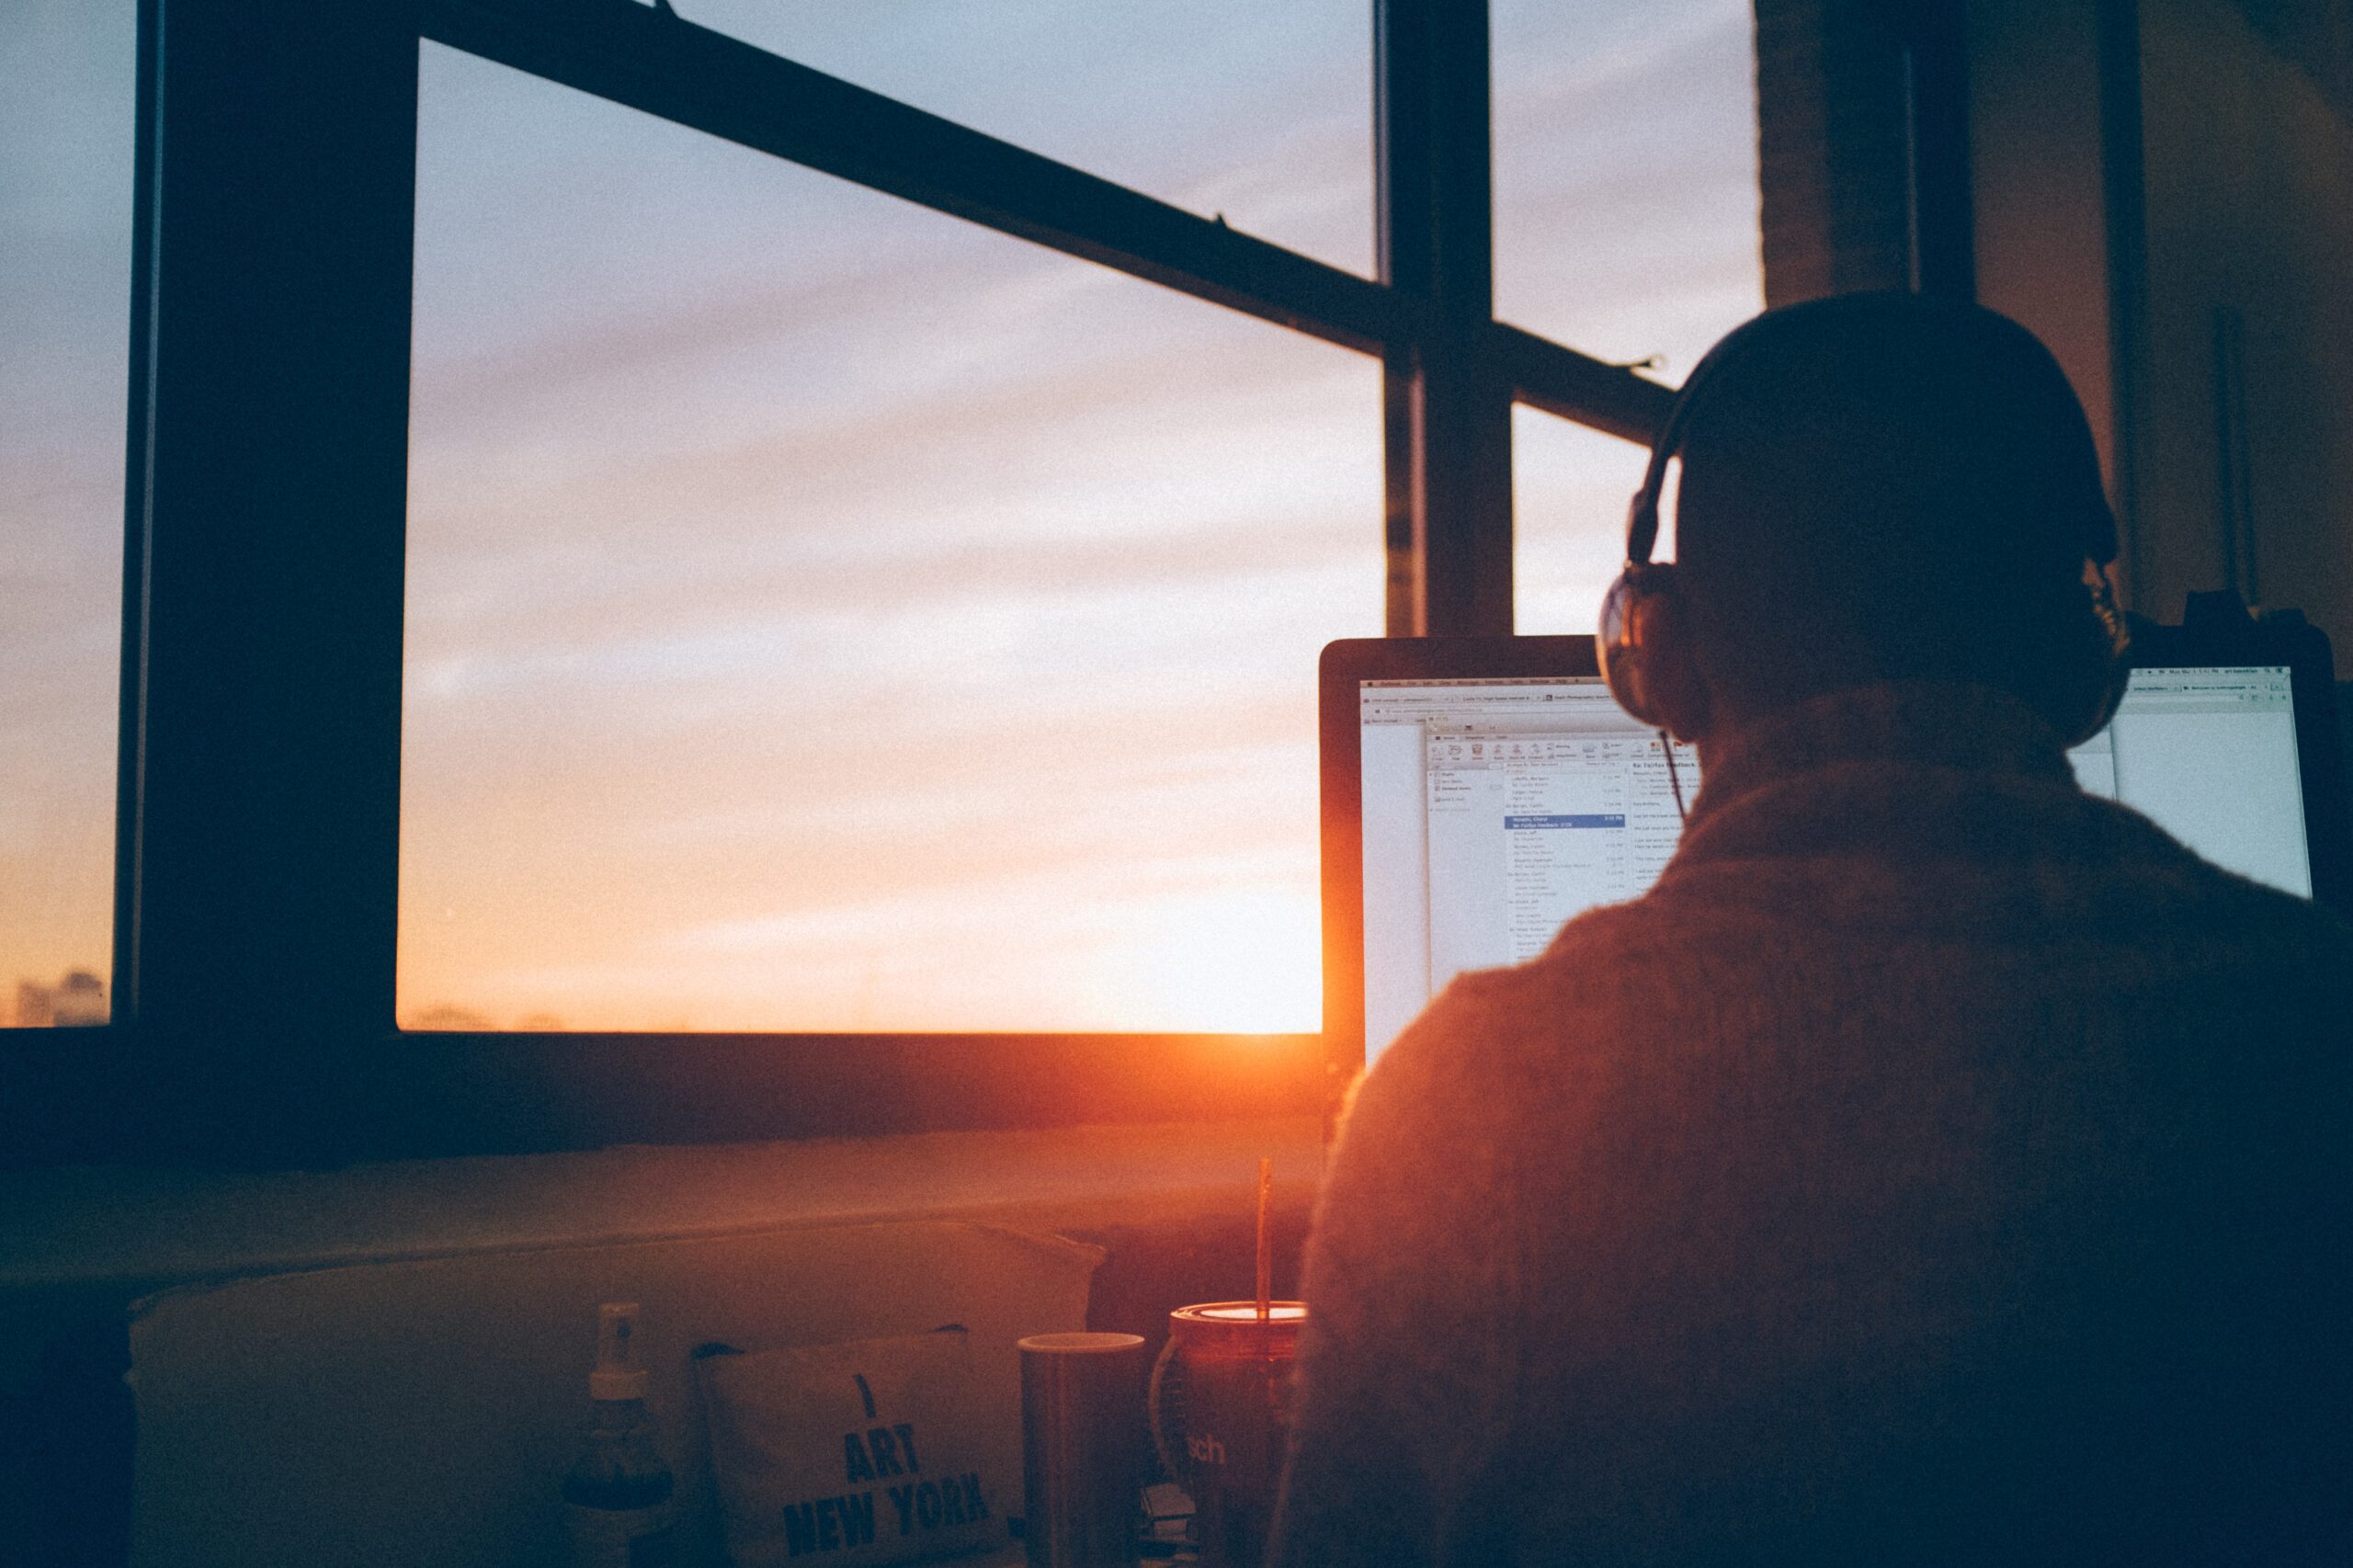 Person with headphones on working on desktop computer at sunset